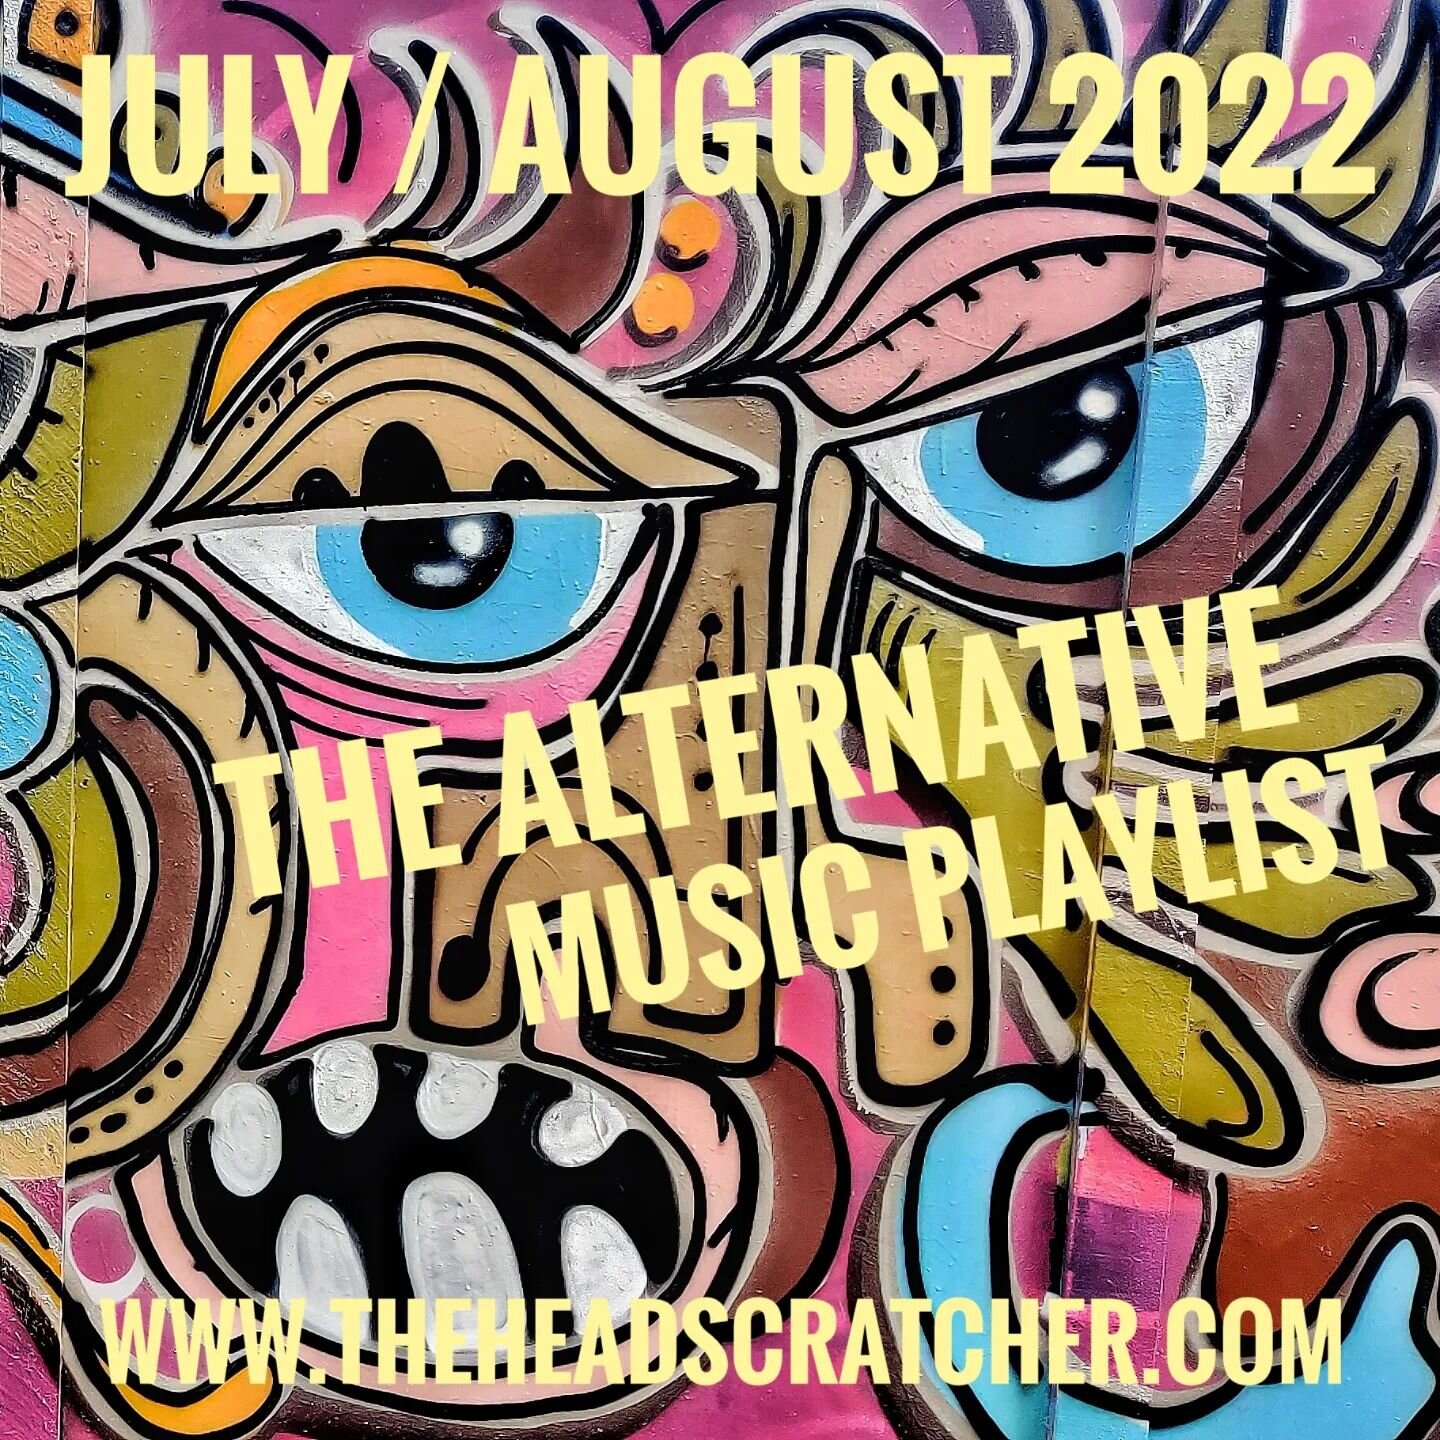 You lucky people: The Alternative Music Playlist for July / August 2022 is OUT NOW.

8 hours of eclectic goodness 🤘🎶🎧👌

Give your ears a treat!

LINK IN BIO

 #newmusic #newmusicfriday #newmusicalert #music #playlist #listen #alternative #alterna